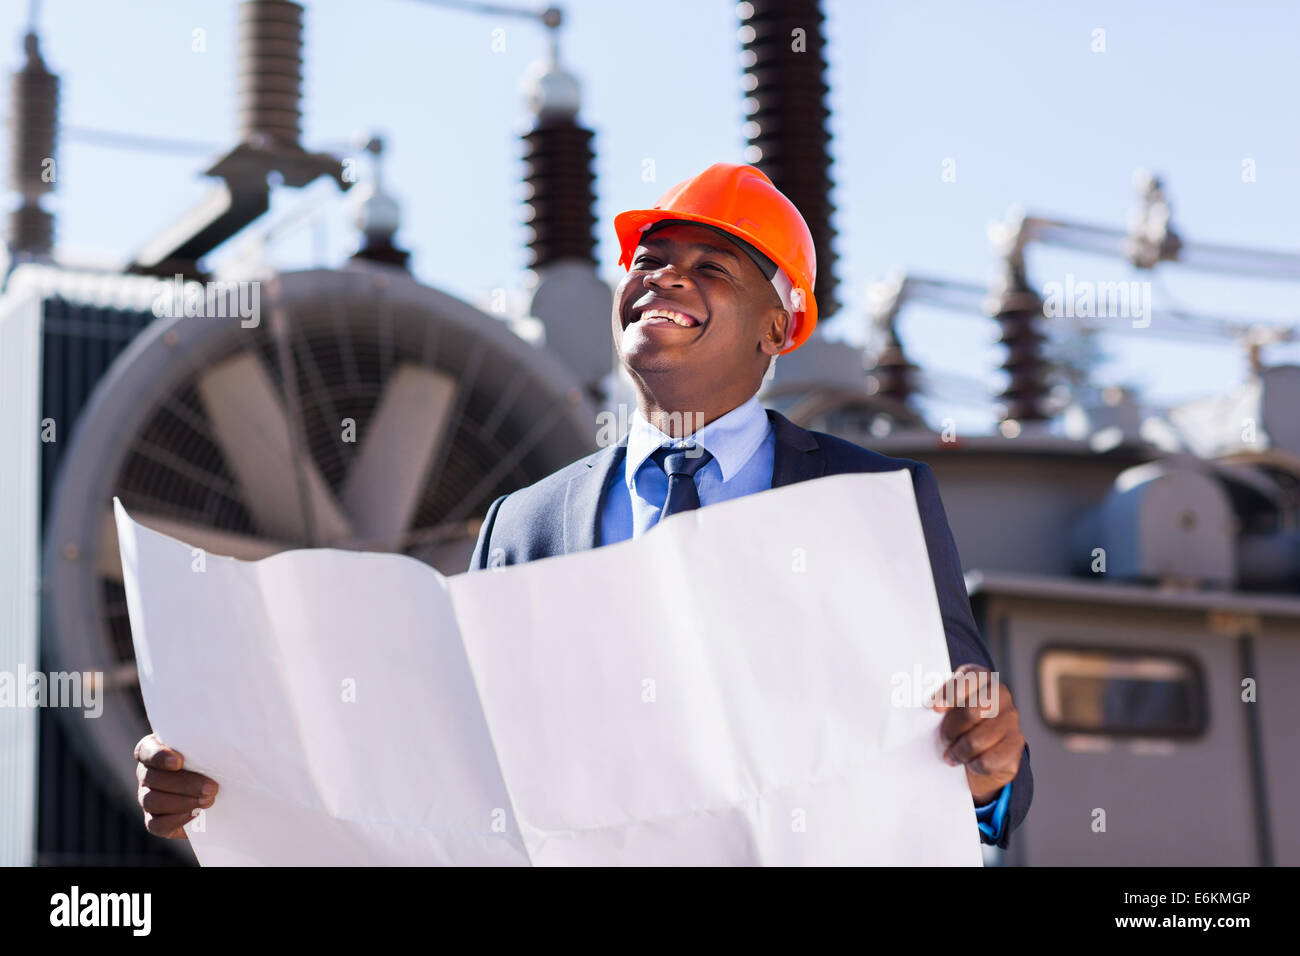 African American industrial manager in electric substation Stock Photo